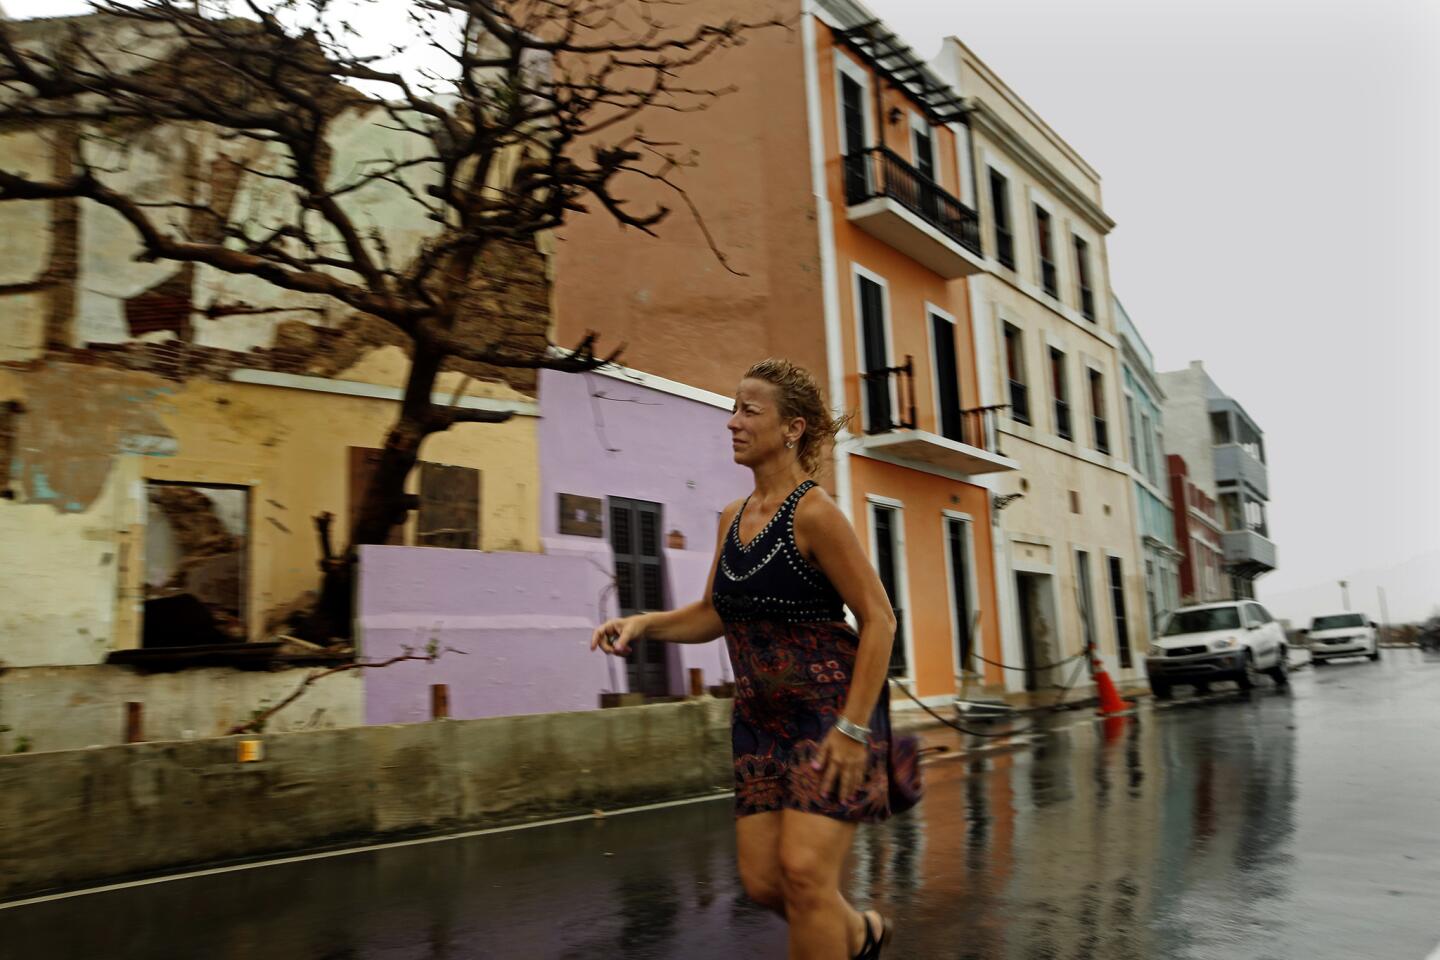 Old San Juan resident Rosa Avalo, 48, saw her home, purple building, damaged by debris from her neighbor's property.